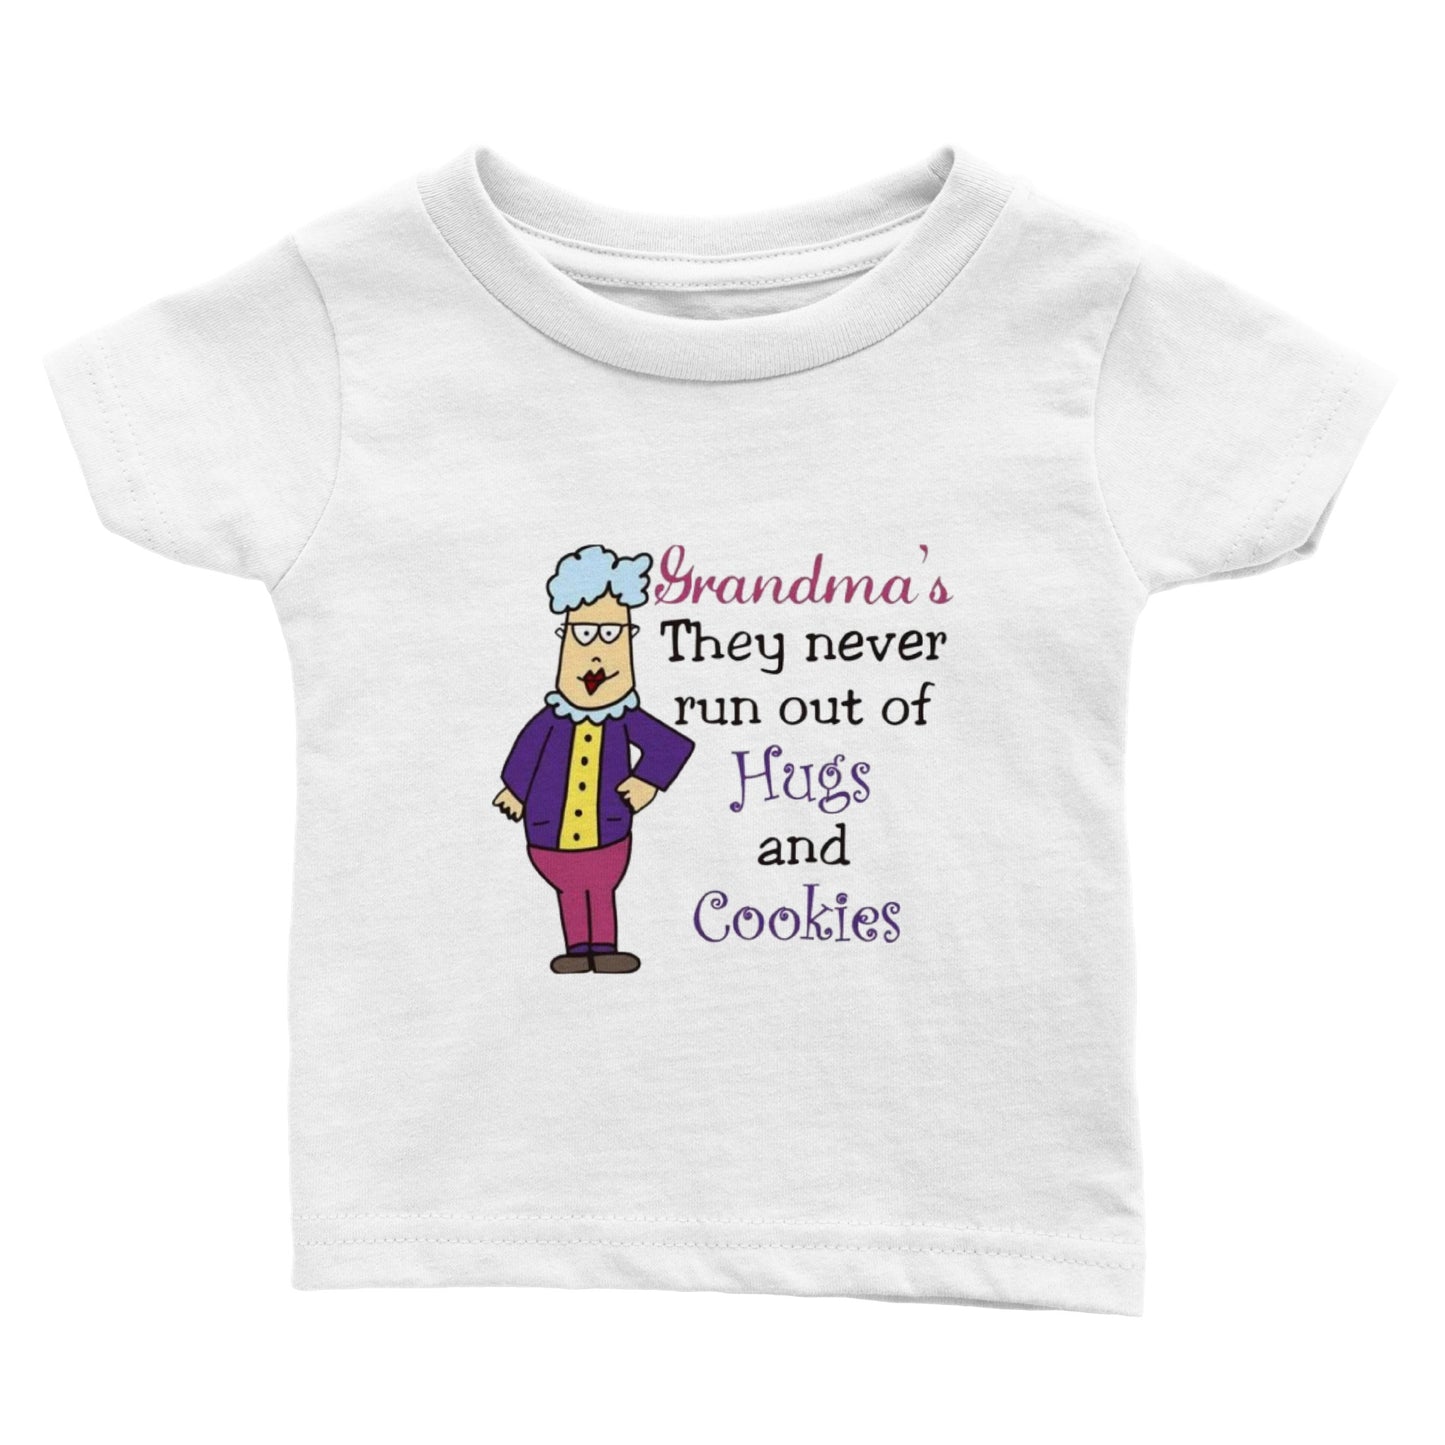 Grandma's They Never Run Out of Hugs. Classic Baby Crewneck T-shirt